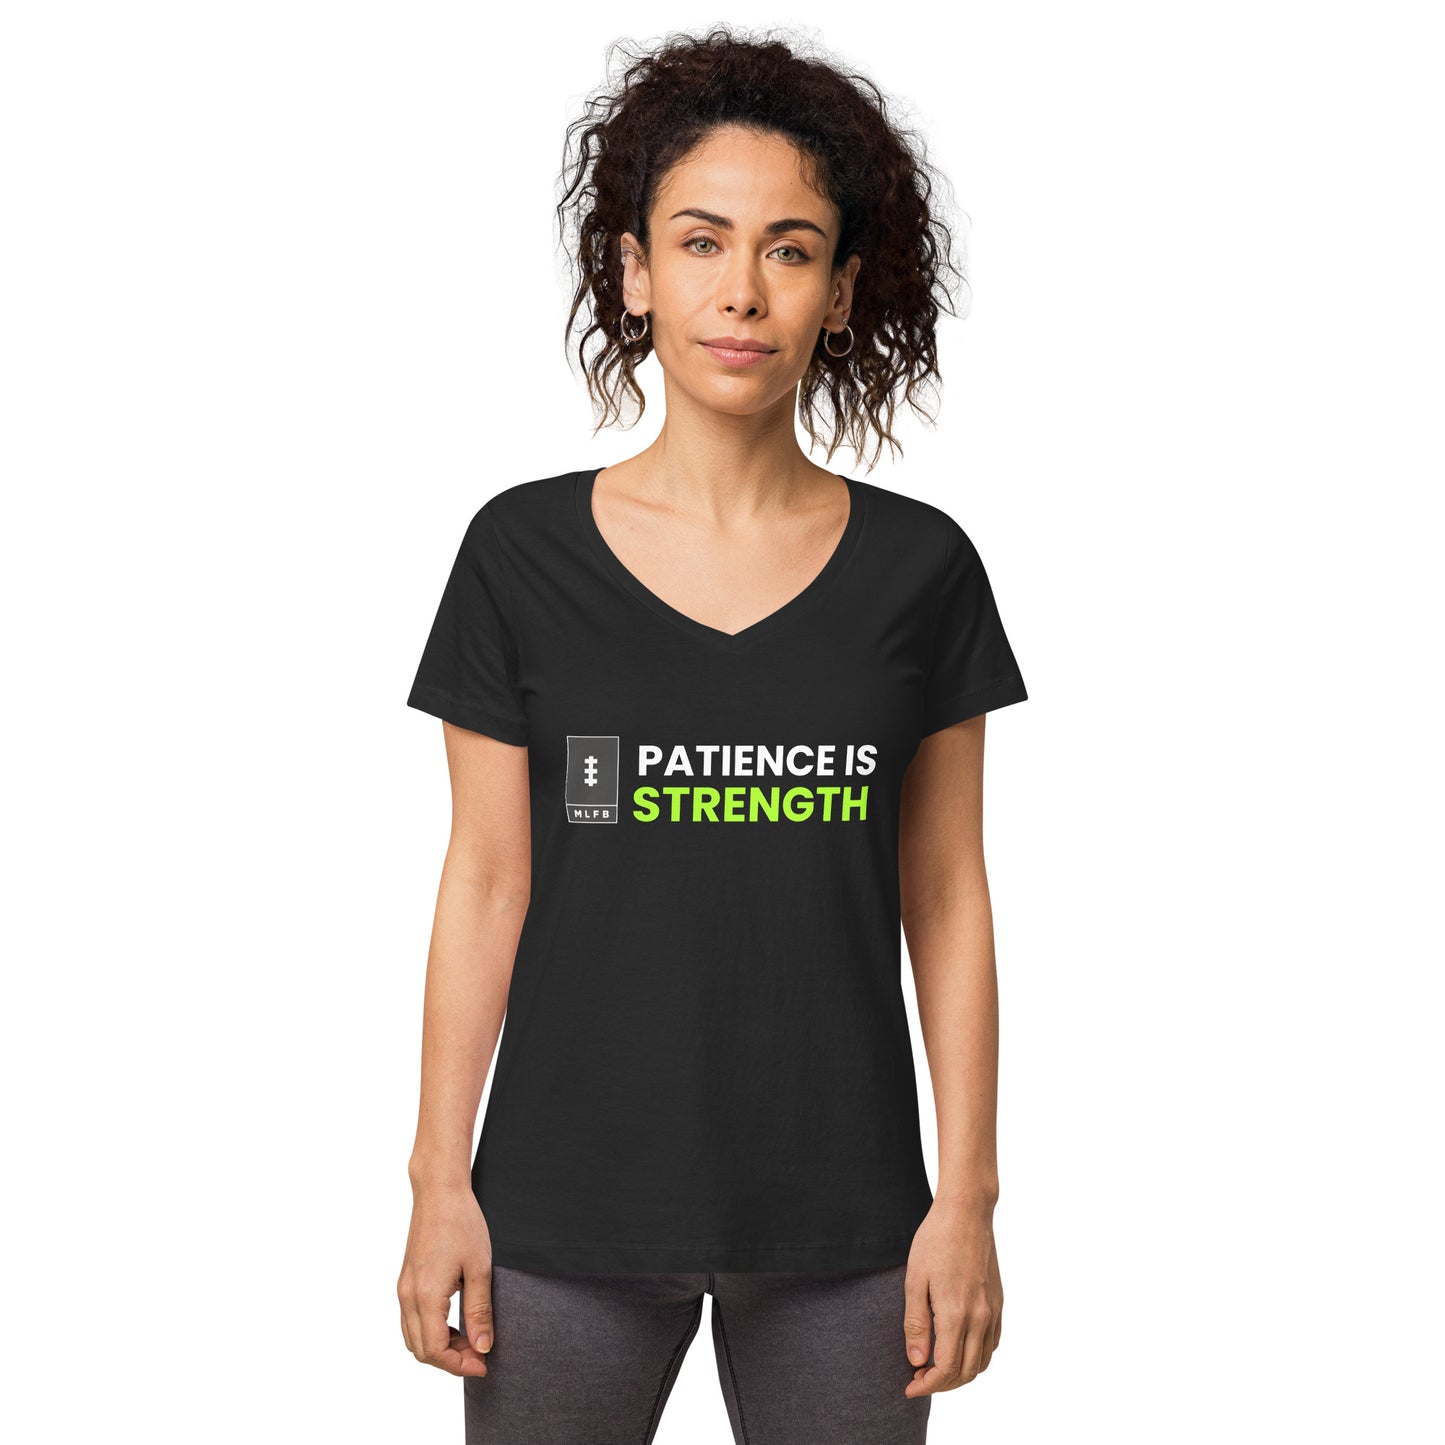 Women’s Patience Is Strength fitted v-neck t-shirt